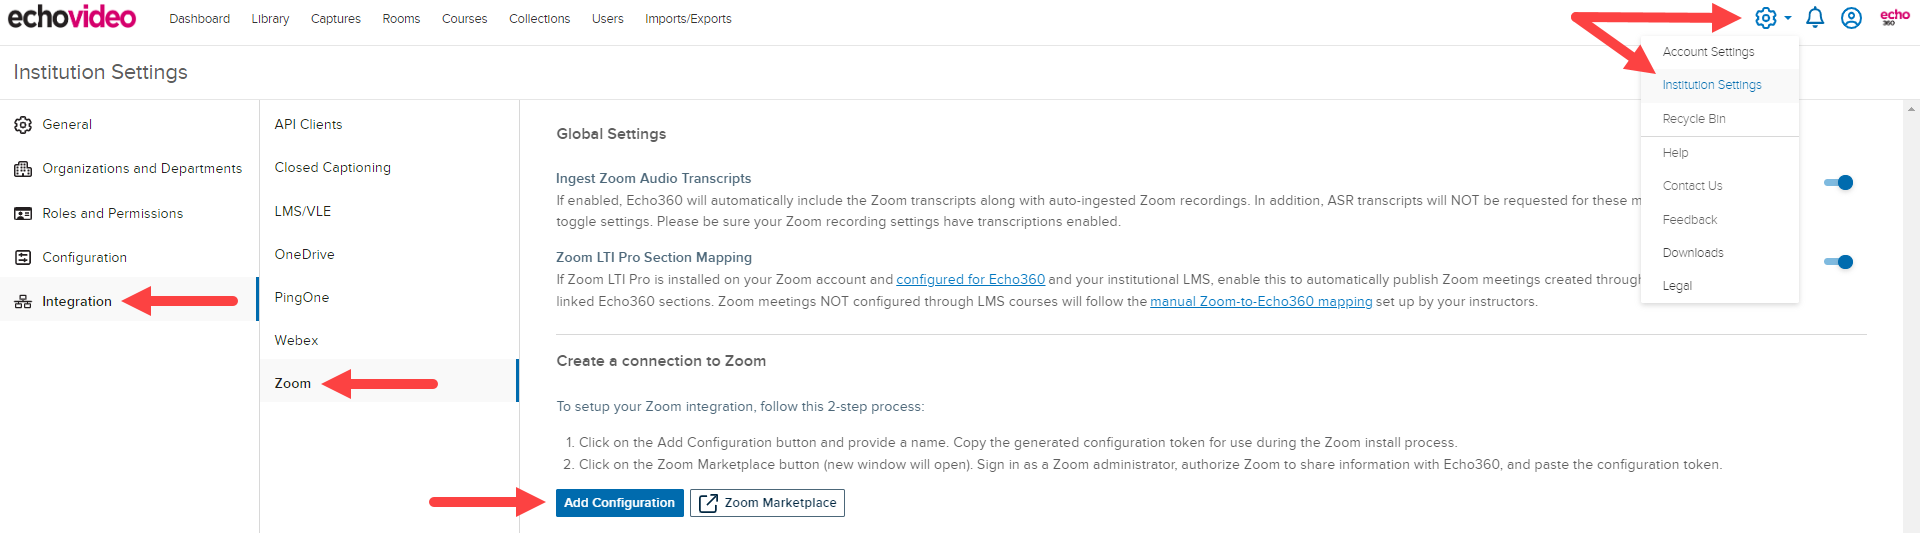 Echo360 Integration page with navigation and Zoom configuration option identified as described